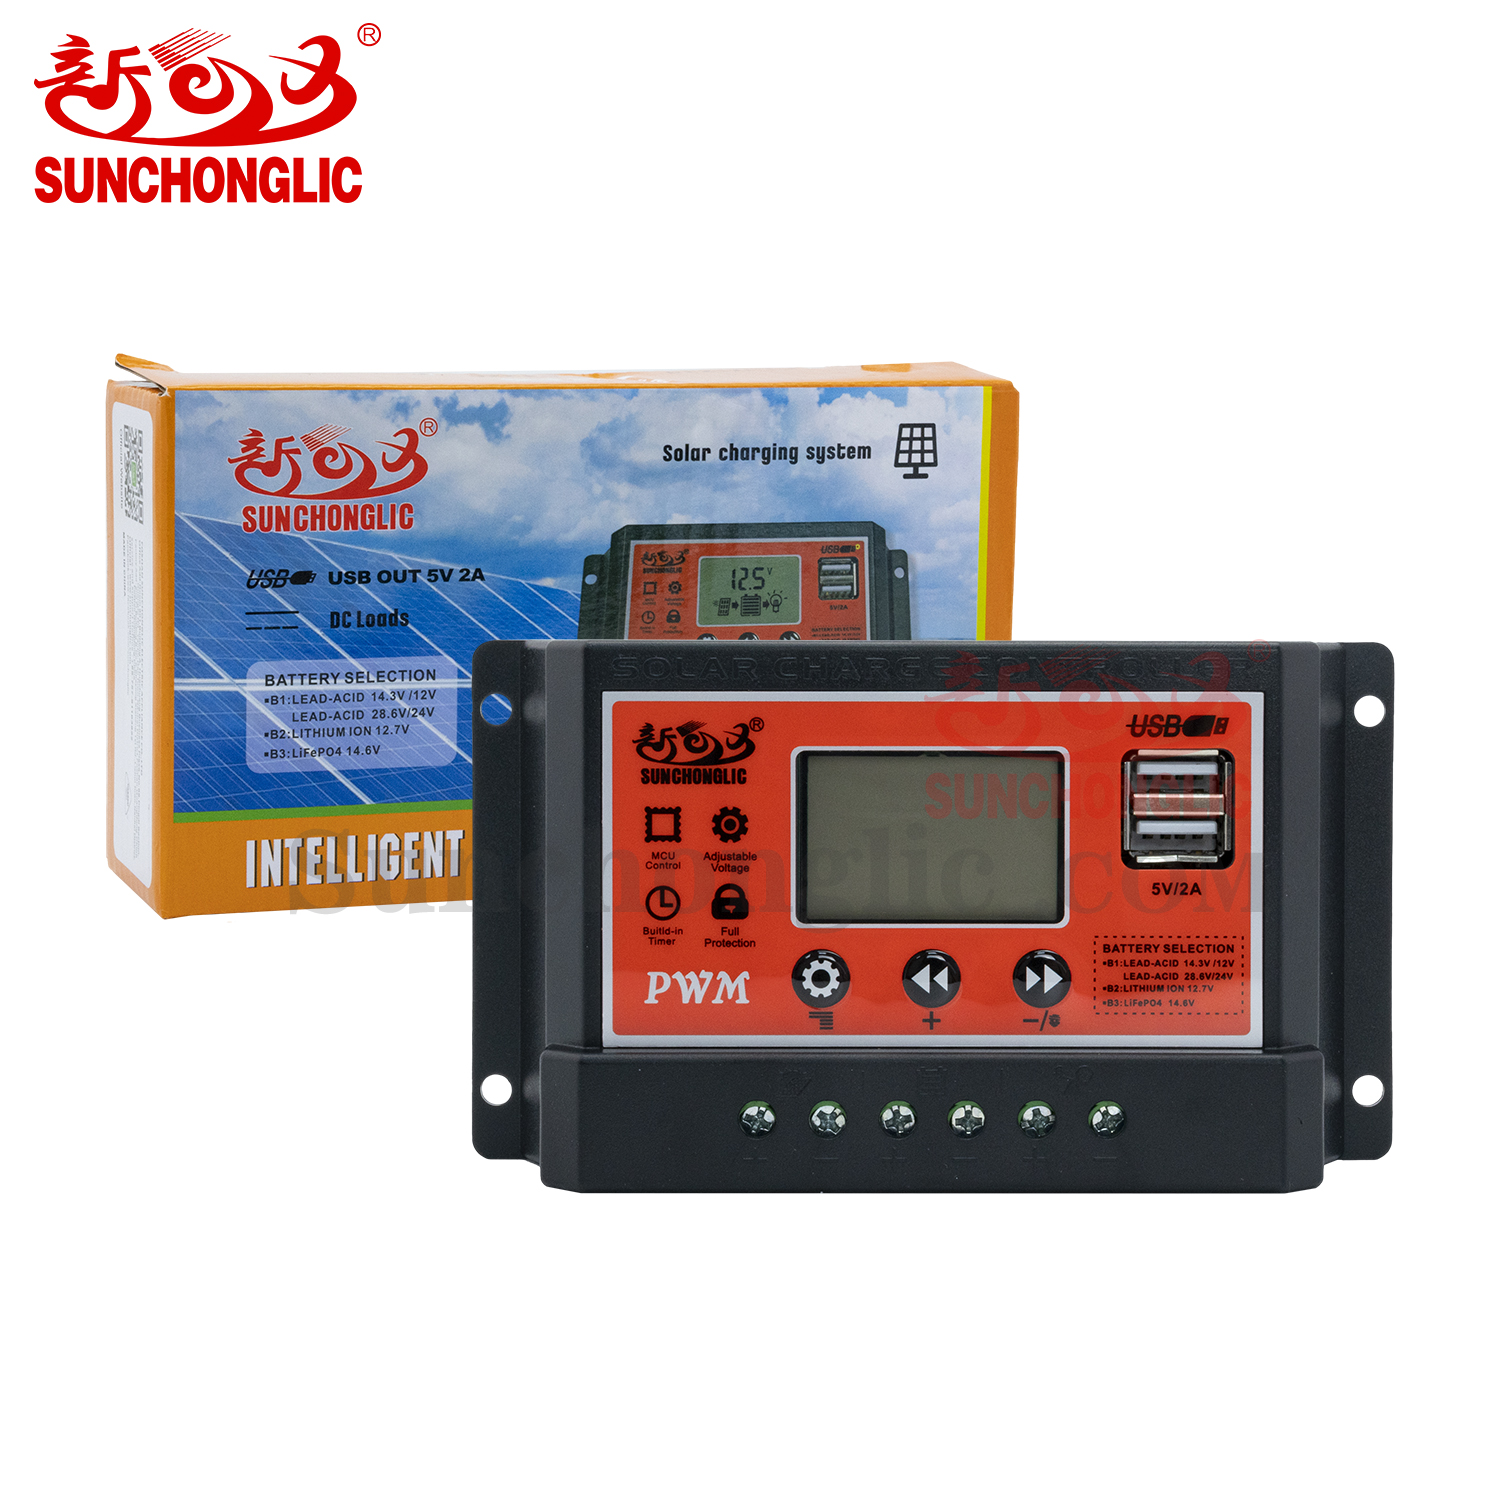 Solar Charge Controller - FT-D1210